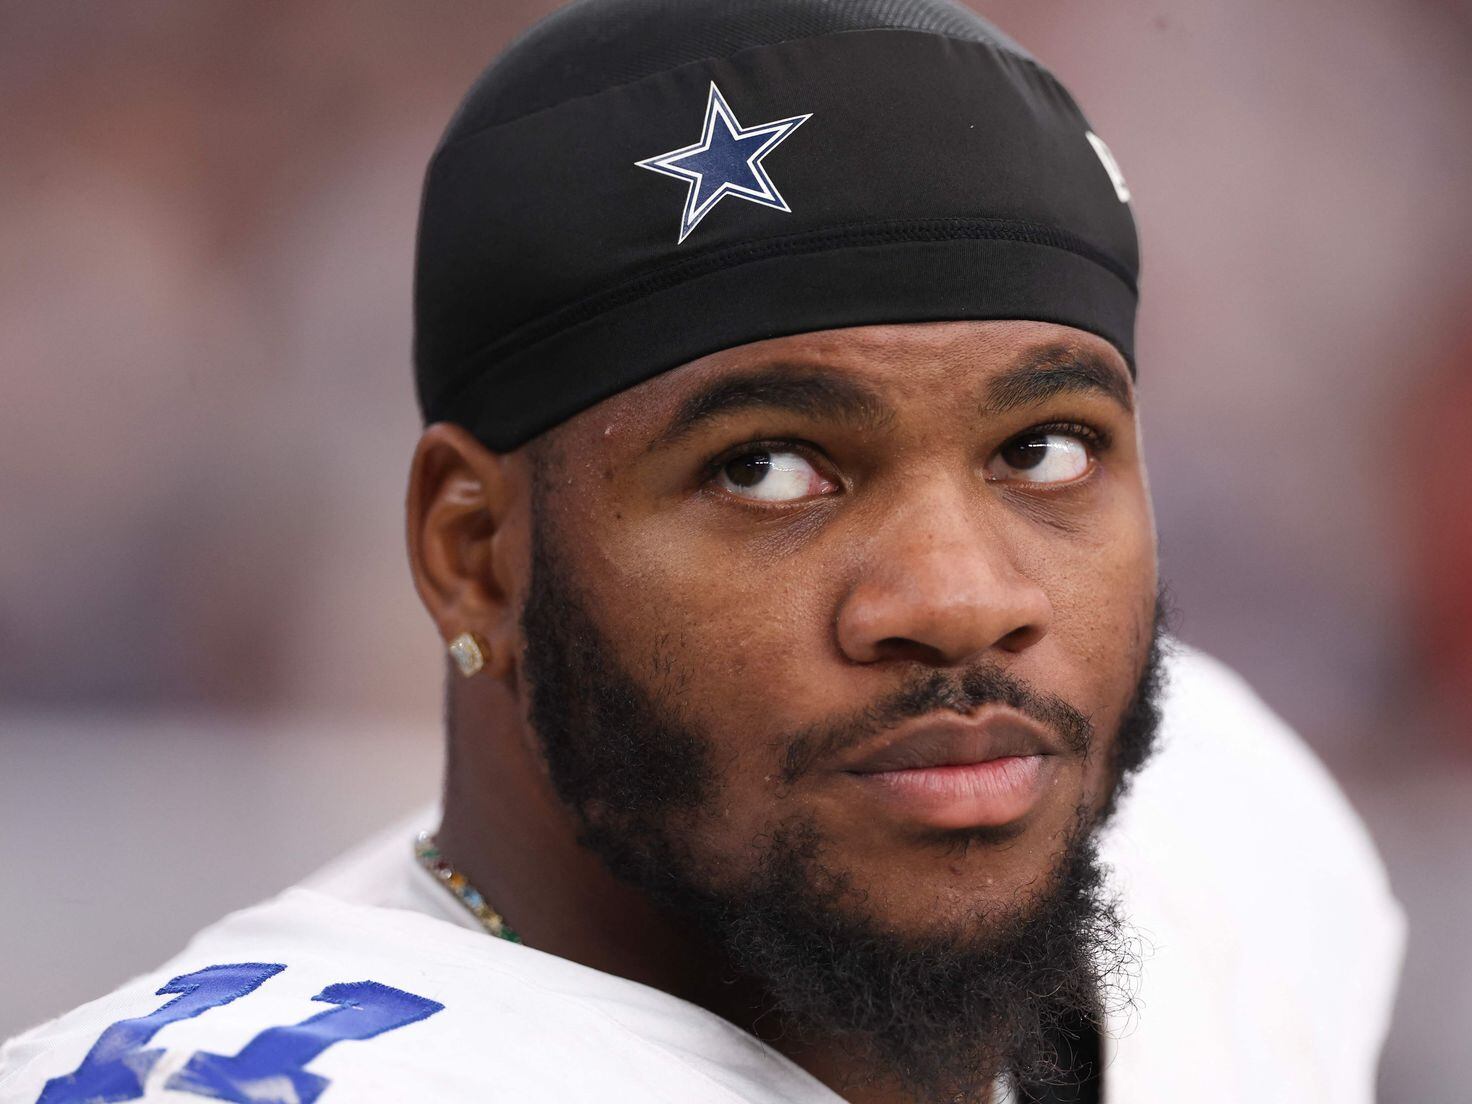 Micah Parsons injury: Did the Cowboys' LB get hurt against the Patriots?  How long will he be out? - AS USA